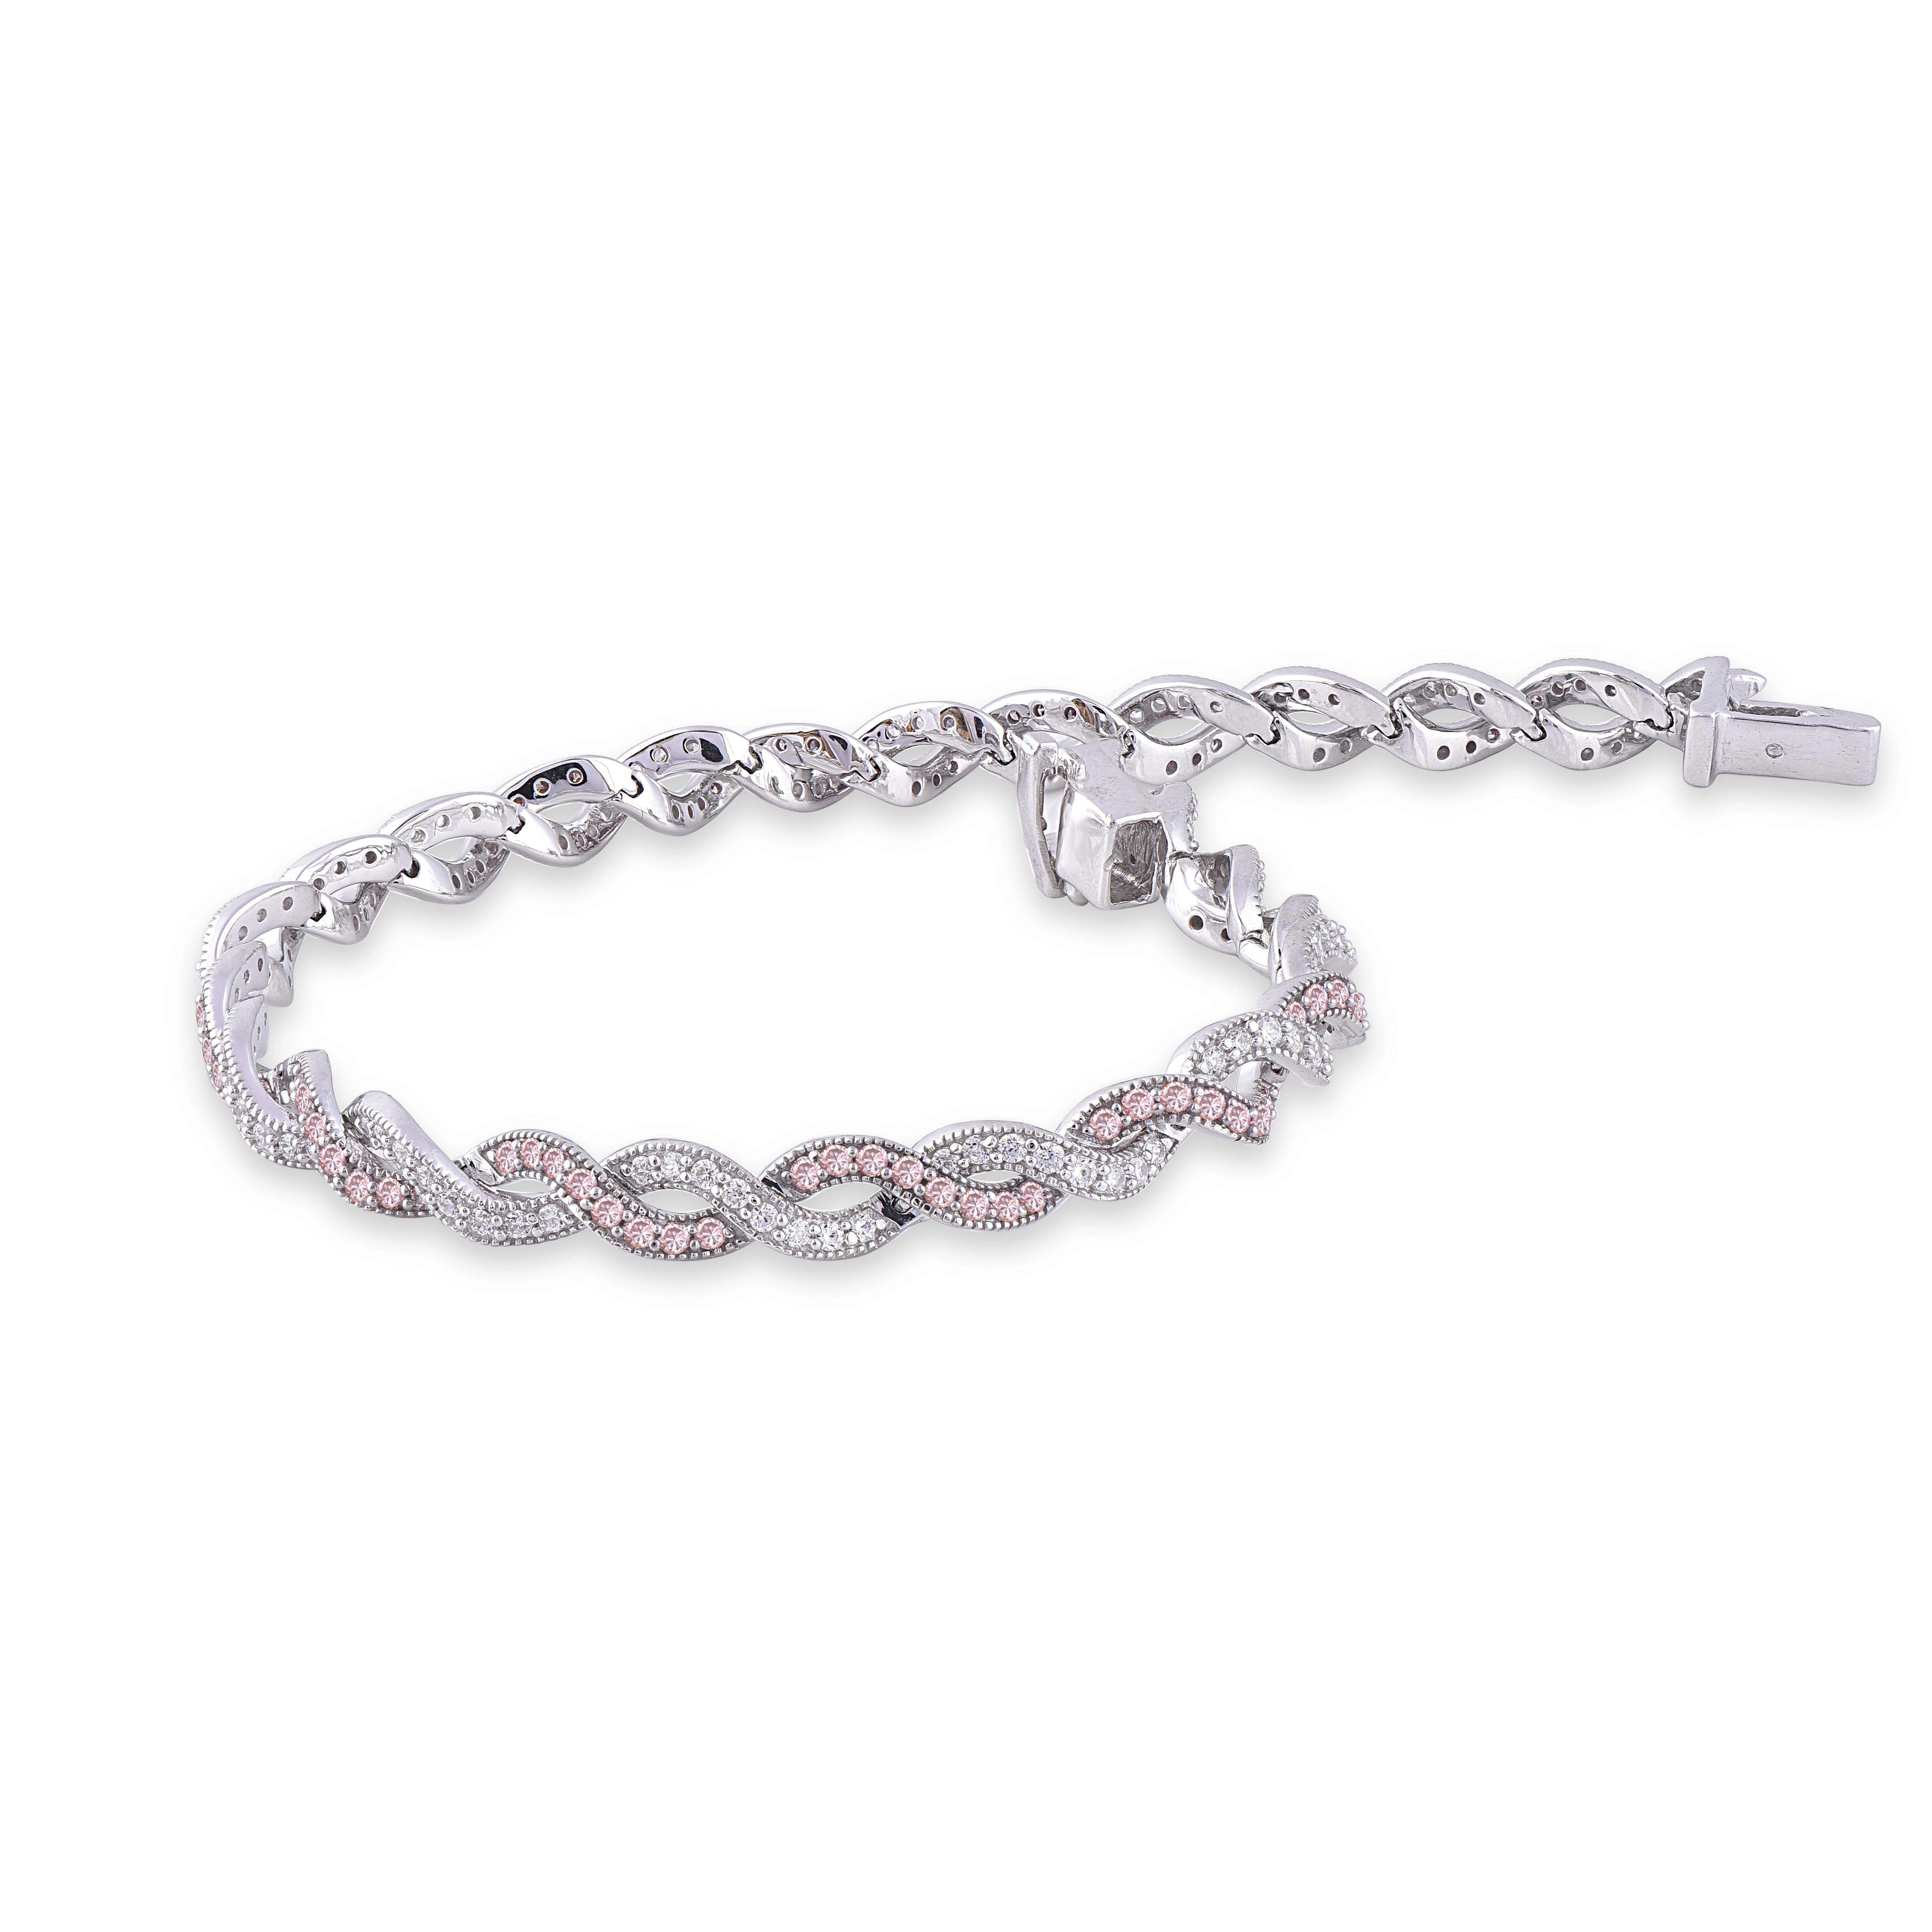 With contemporary elegance, this diamond wavy fashion bracelet is a chic accessory she'll wear with everything. This link bracelet is crafted by our inhouse experts in 18 karat Two-tone and studded with 104 Natural Pink diamond and 116 White diamond